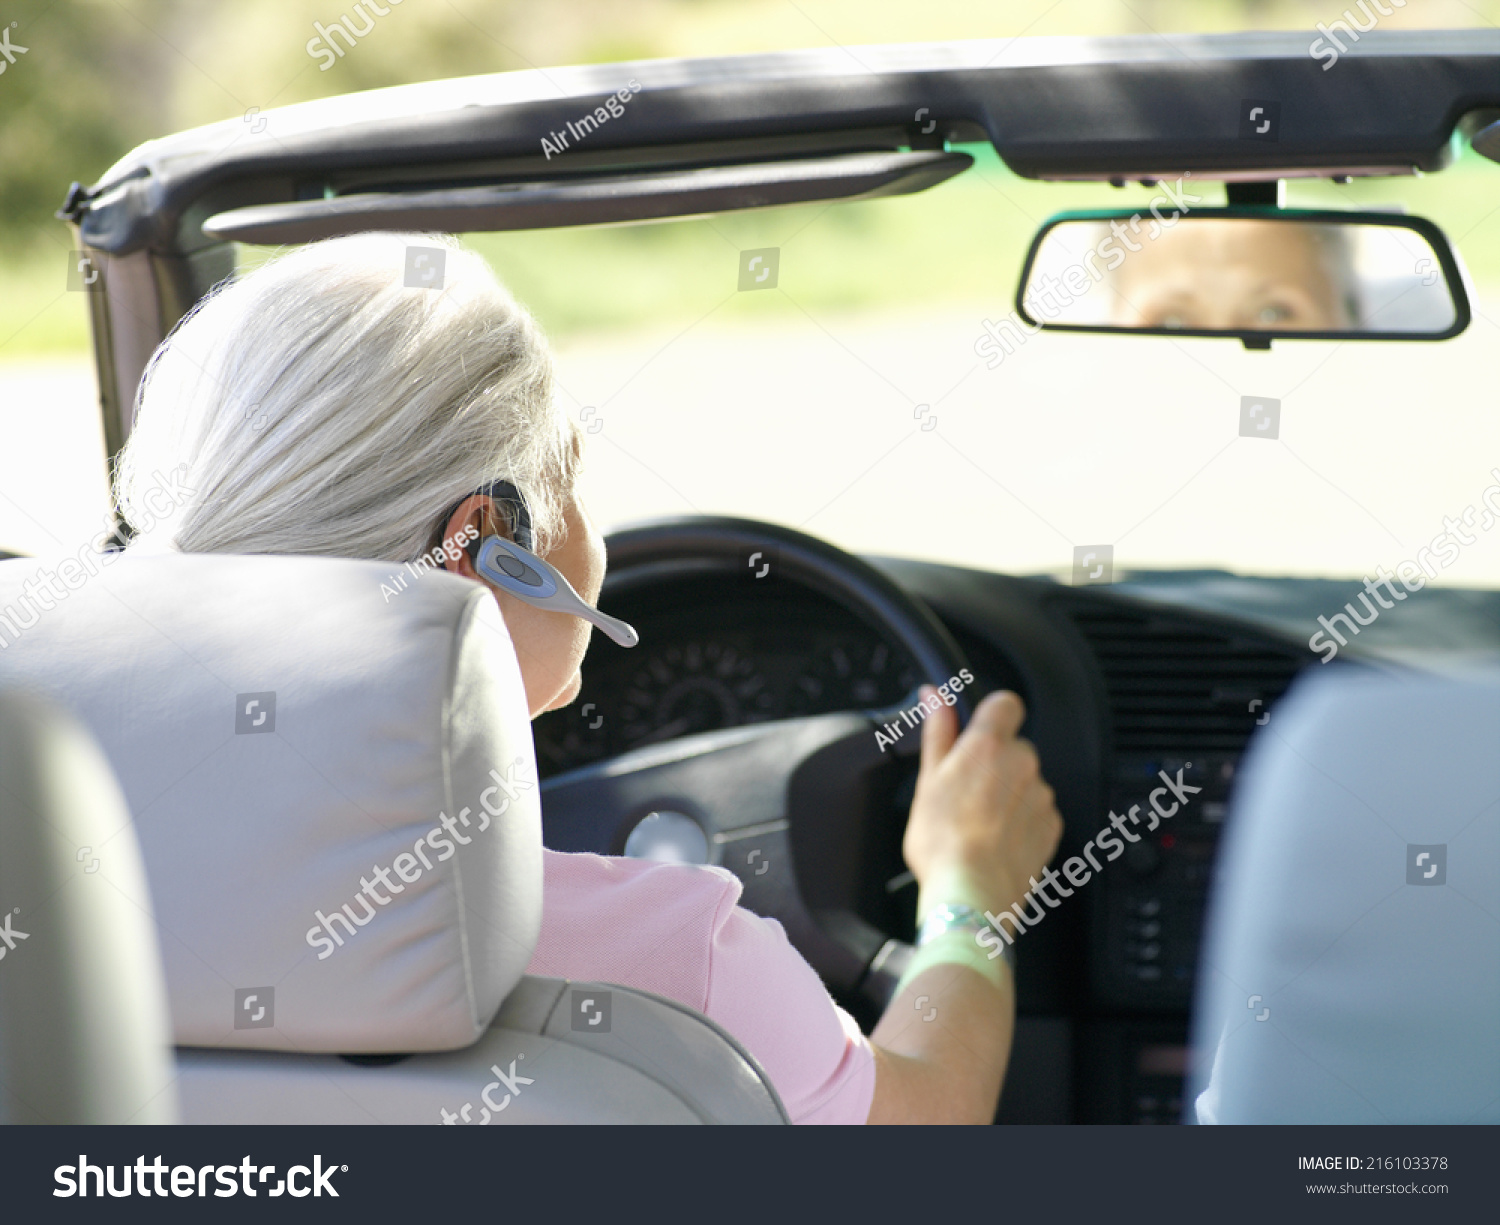 Woman with hands-free device in car, rear view #216103378